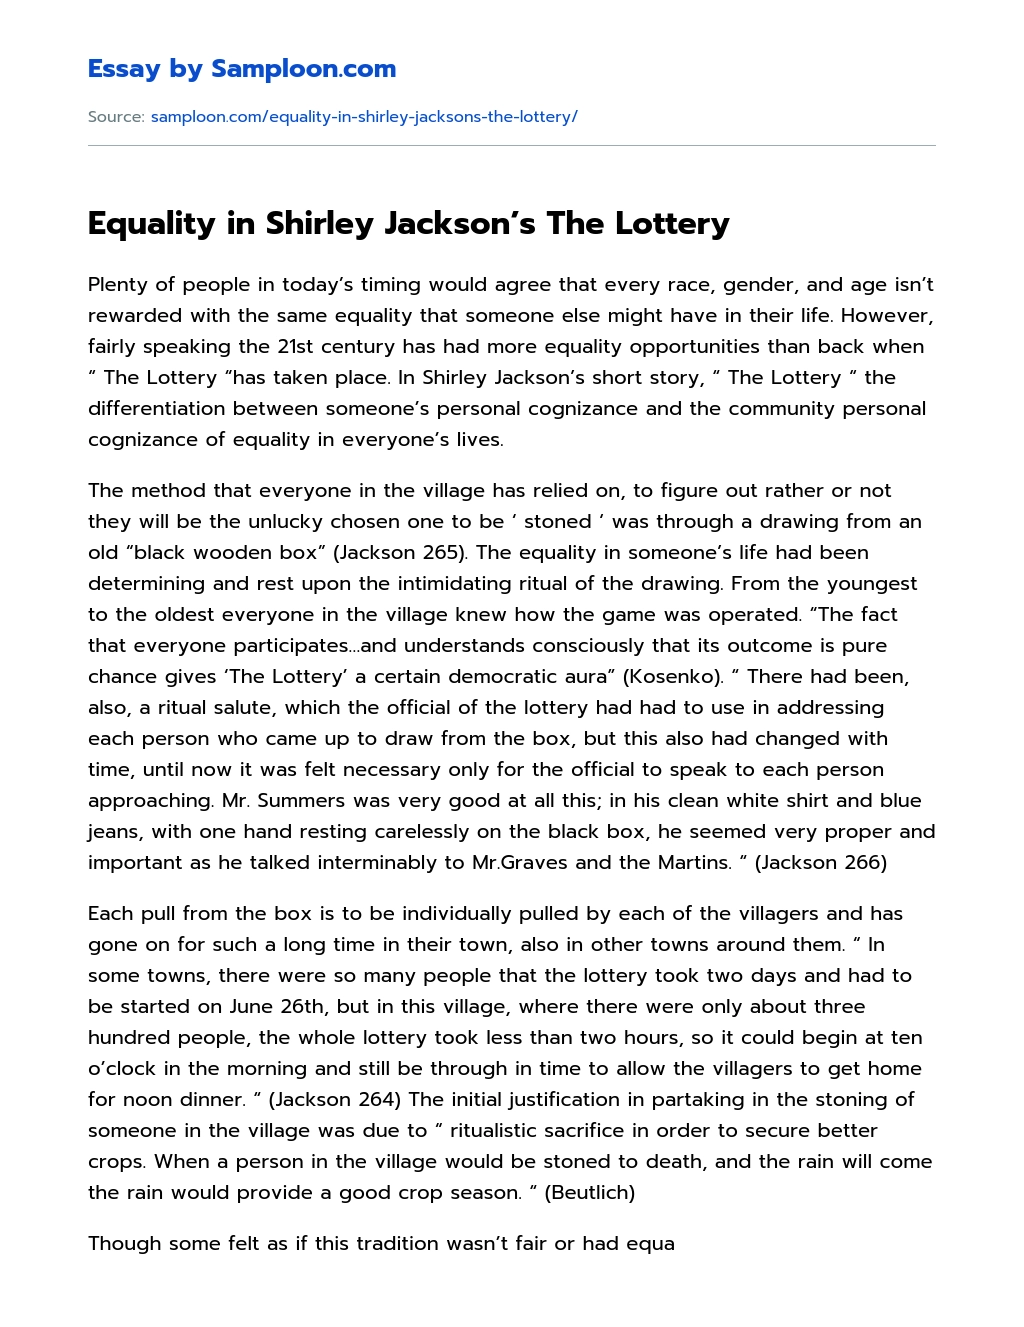 Equality in Shirley Jackson’s The Lottery Summary essay